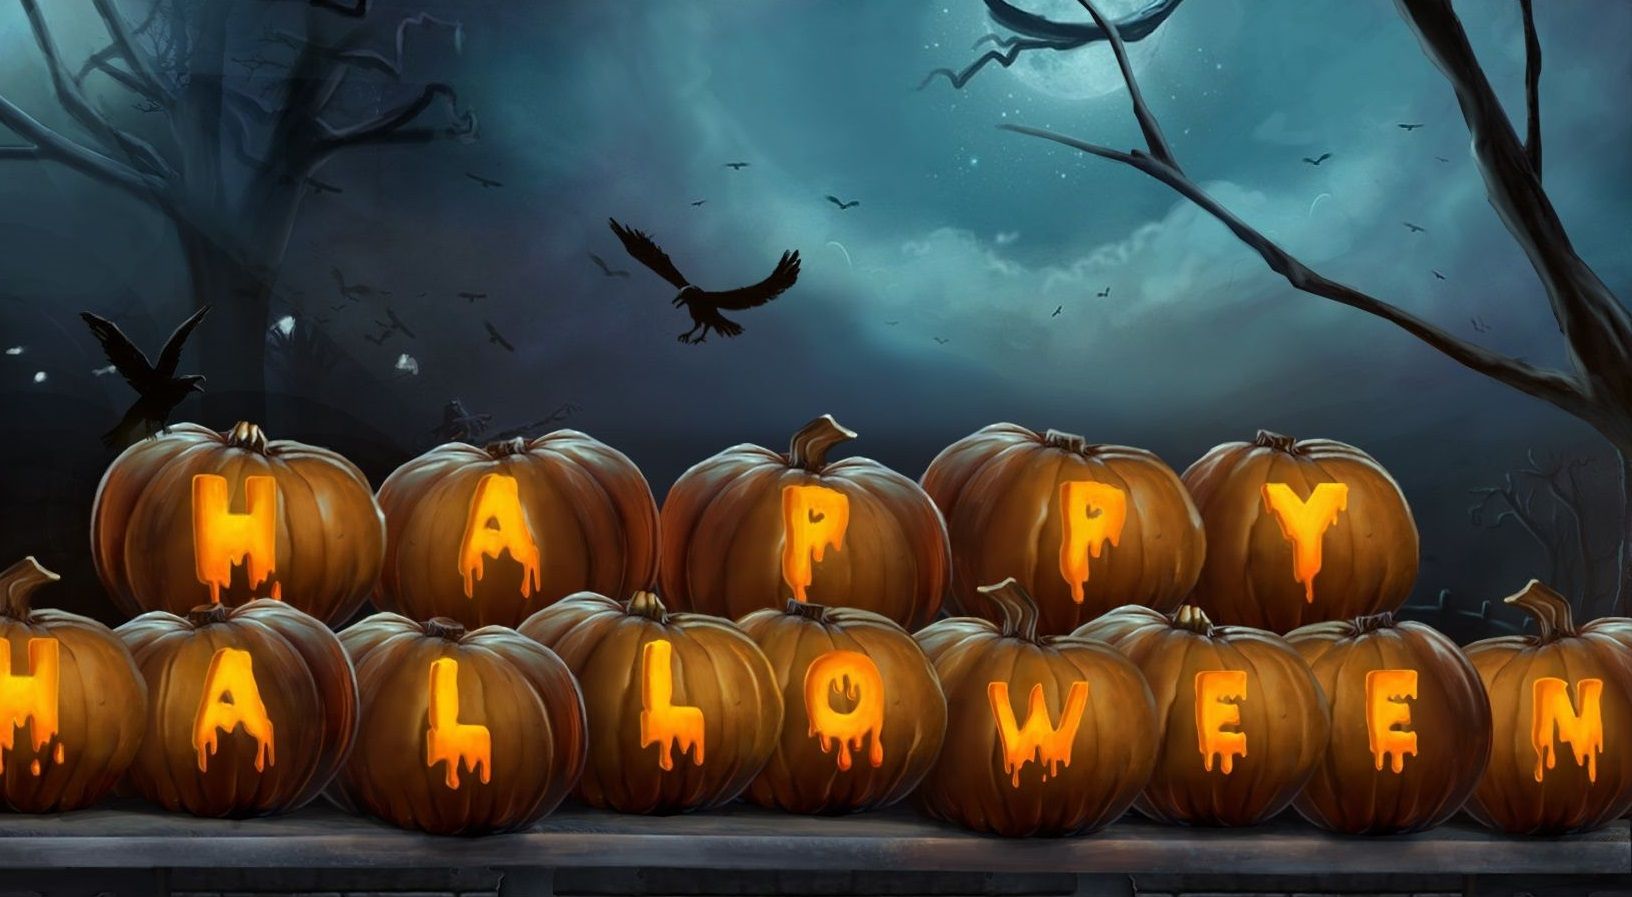 check this Happy Halloween day messages 2016 funny wishes scary image greetings q. Halloween desktop wallpaper, Halloween image, Halloween wallpaper background